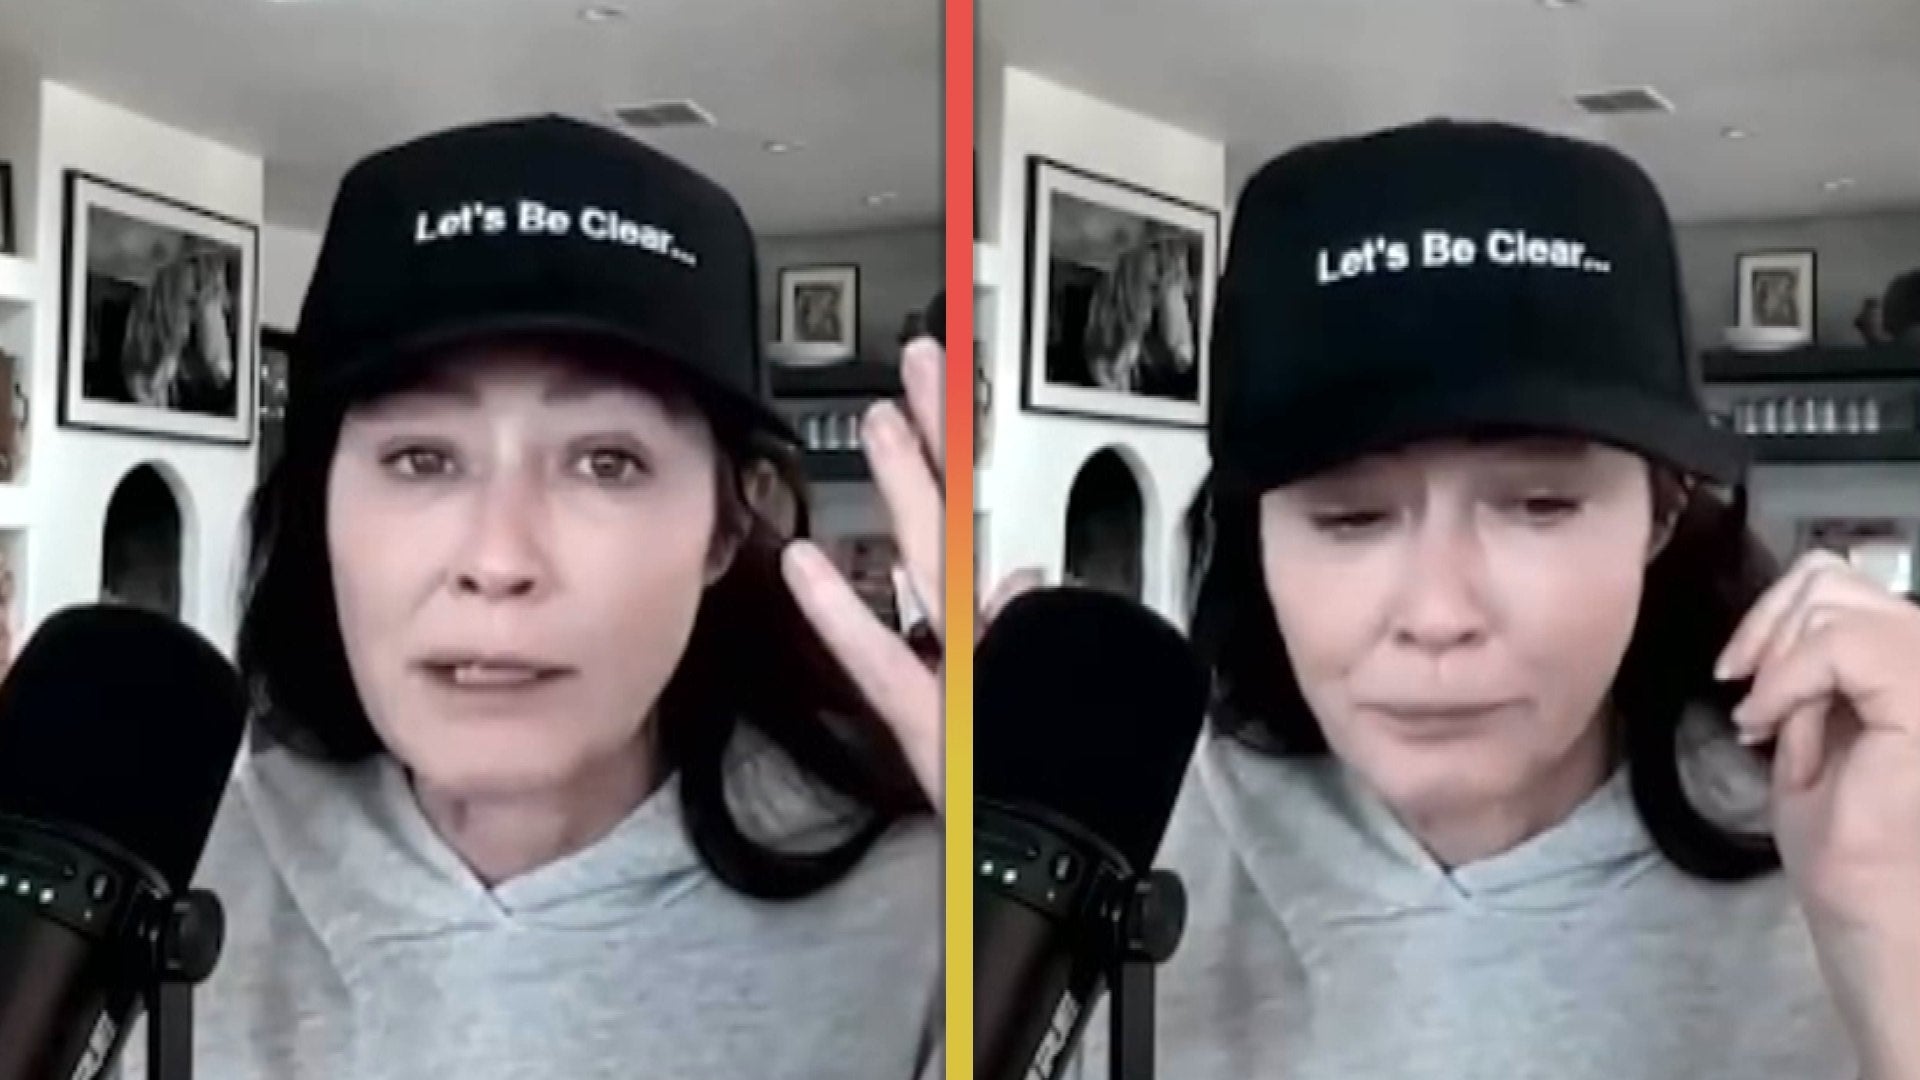 Shannen Doherty 'Wrecked' Over Return to Chemo Treatment